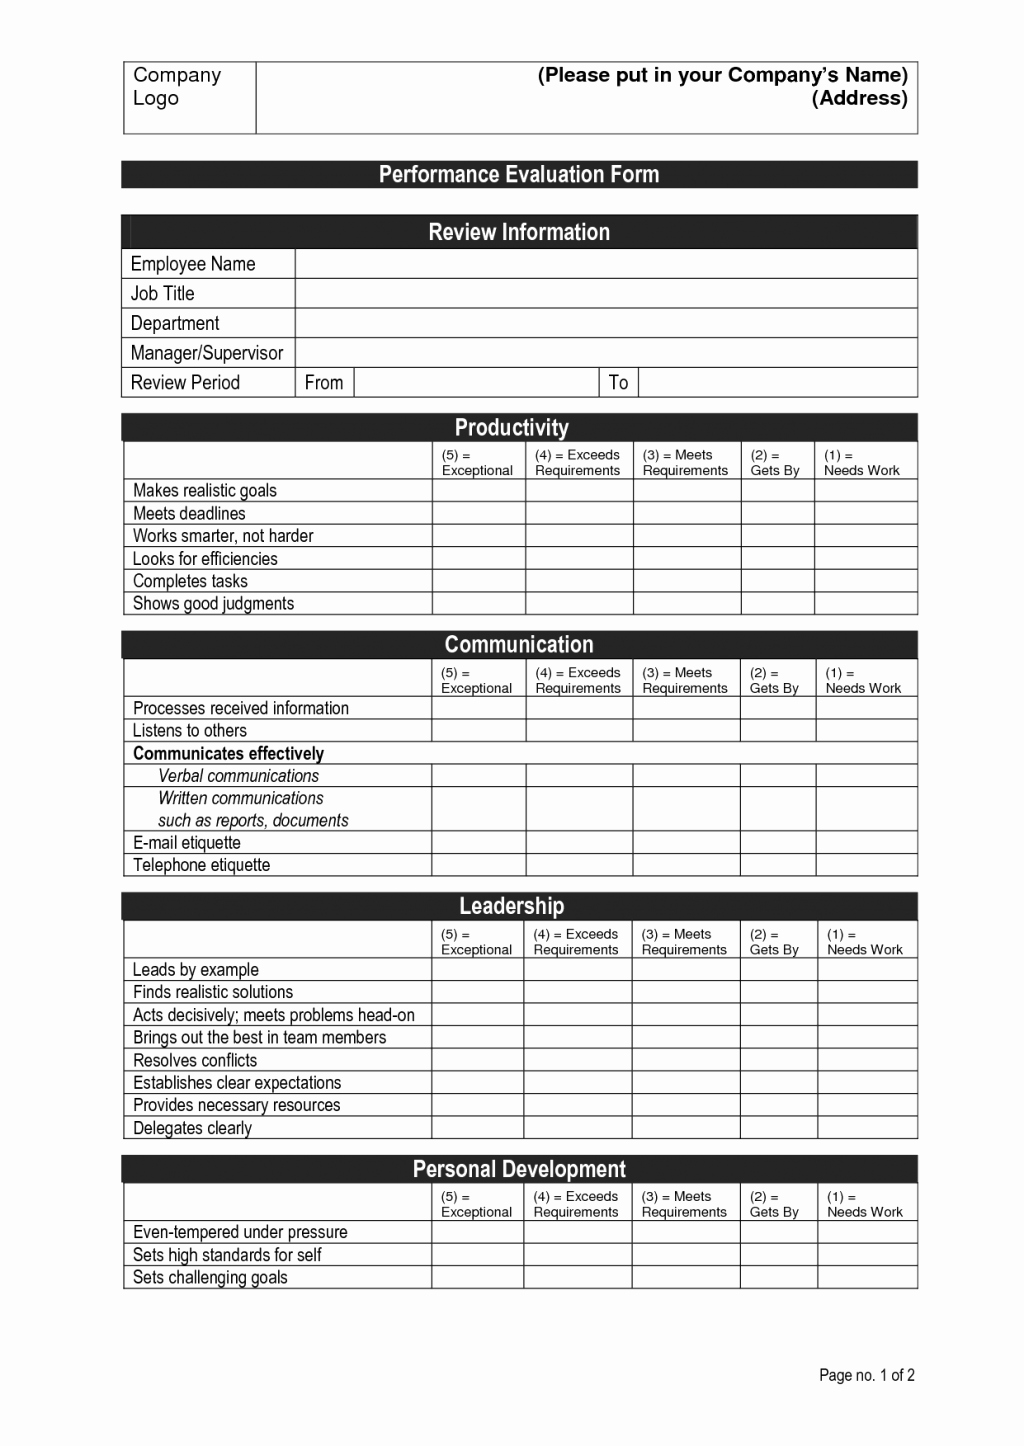 Performance Evaluation form Template Luxury Employee Performance Review Template Doc Evaluation form